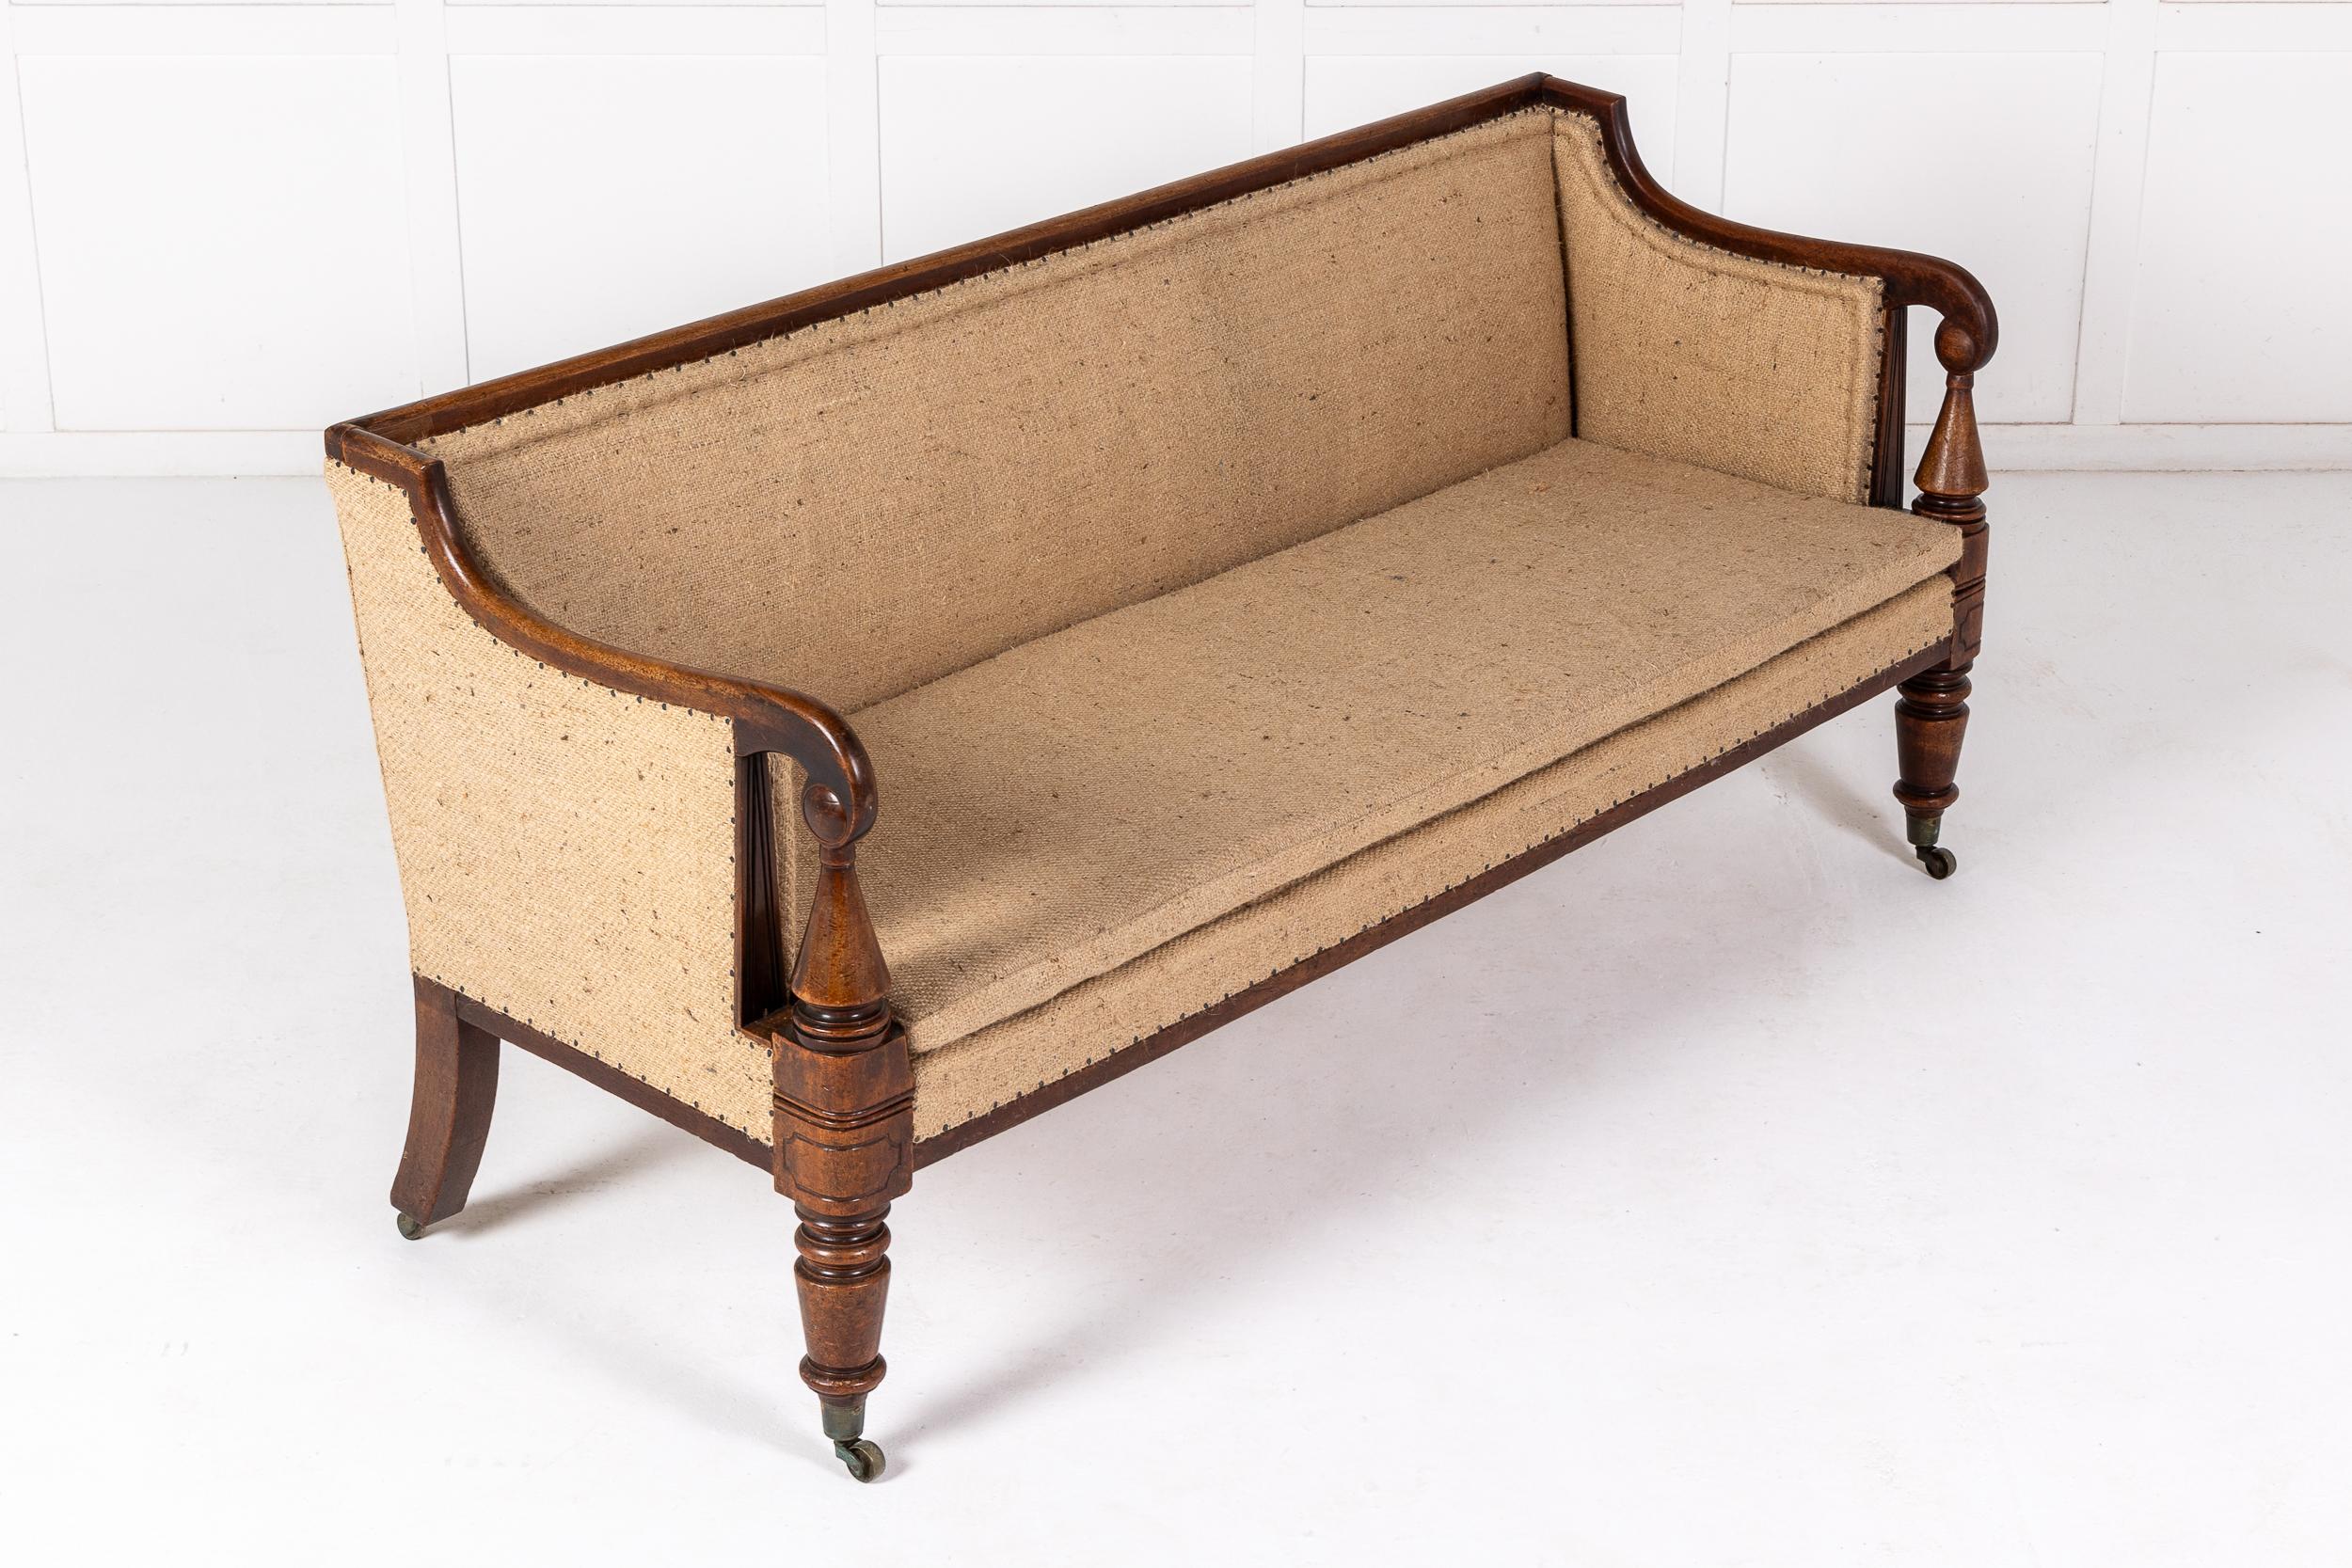 A Quality English Regency Period Mahogany Sofa or Settee c.1820.

Of broadly rectangular form, and substantial quality, with a straight back rail, this practical piece has in-scrolling arm rests supported on turned conical columns supported by